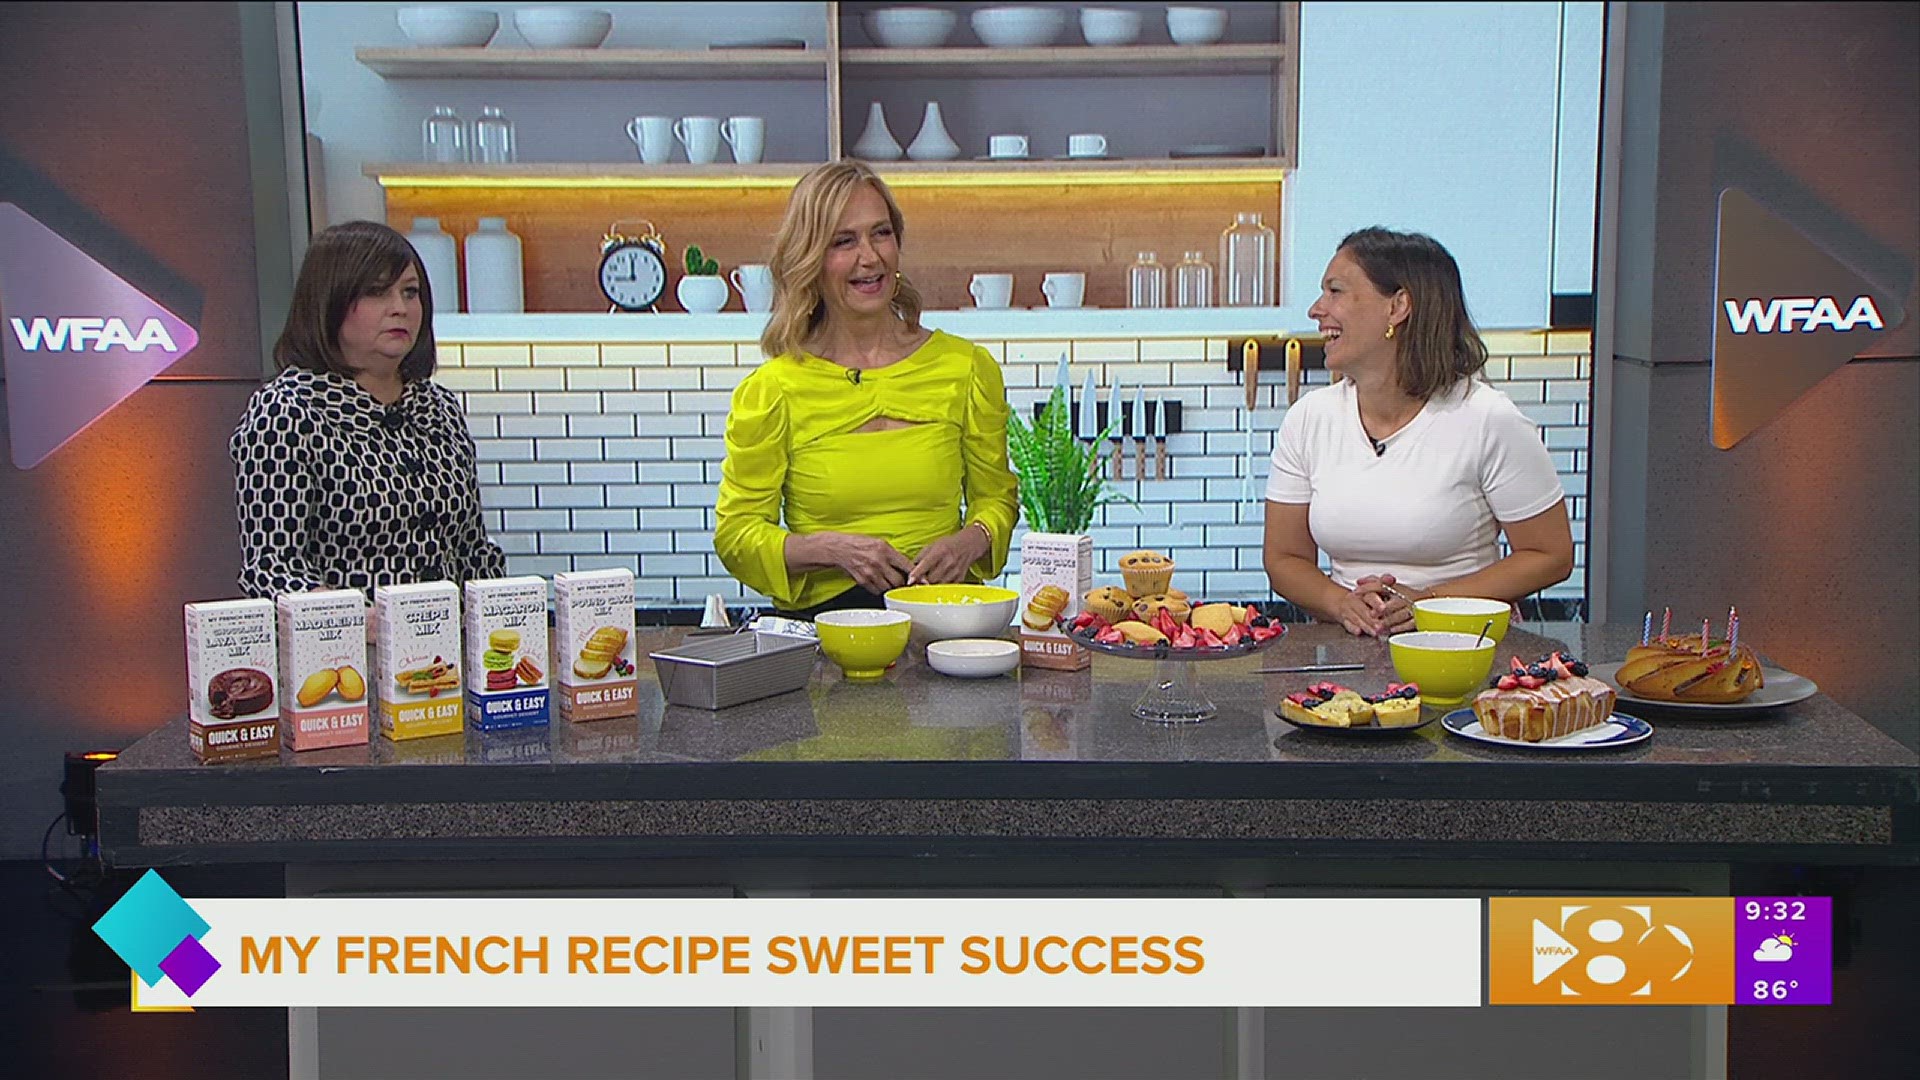 My French Recipe owner and brad creator Isabel Mota tells about her pastry mixes now sold in stores